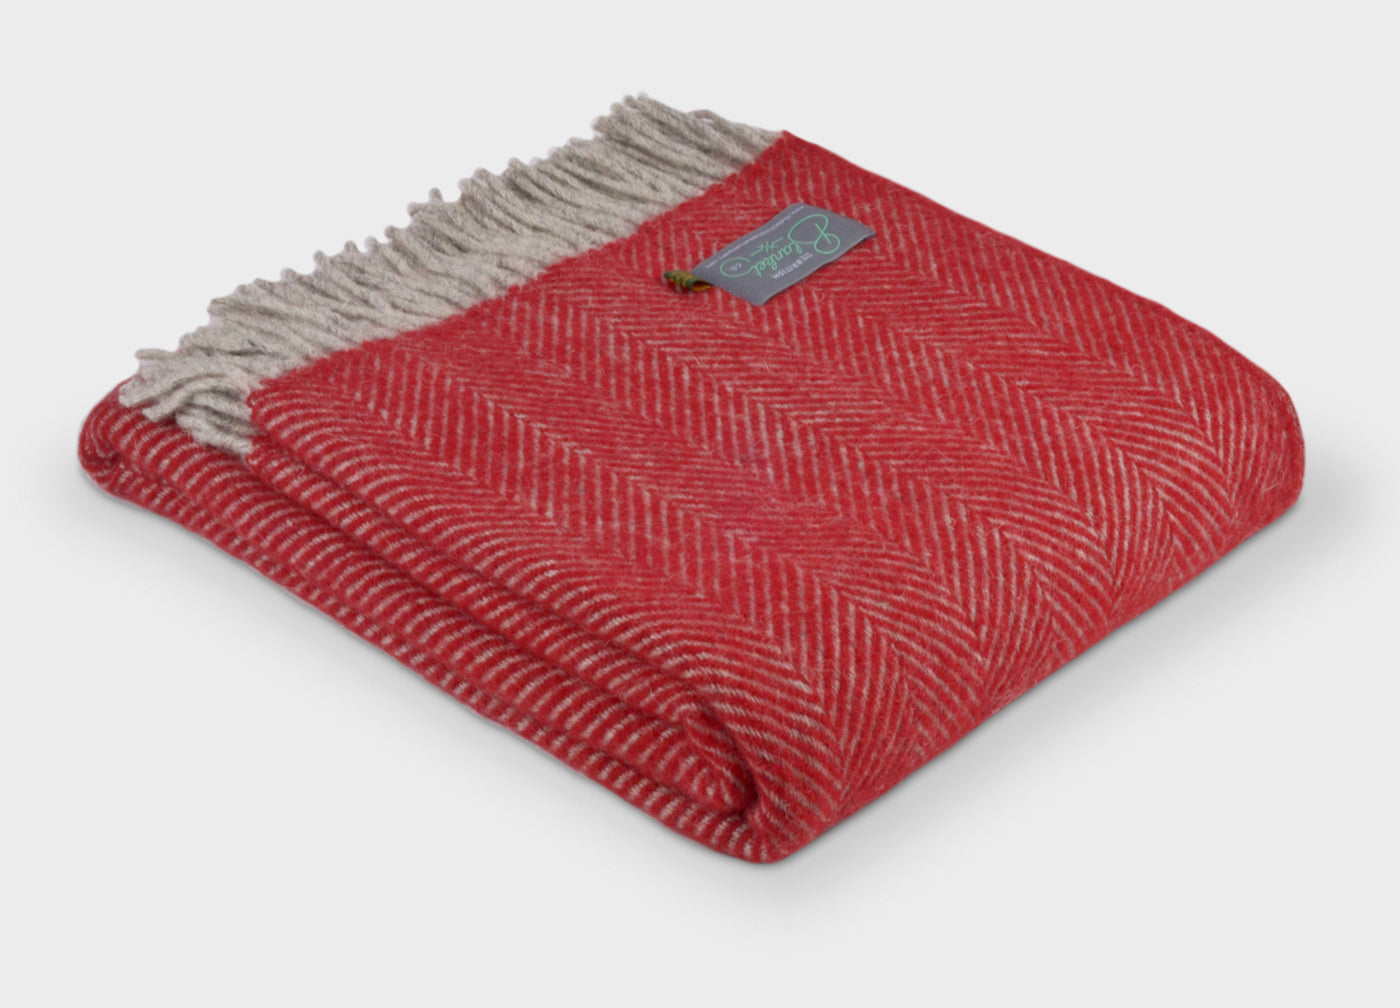 Folded large red and grey herringbone wool throw by The British Blanket Company